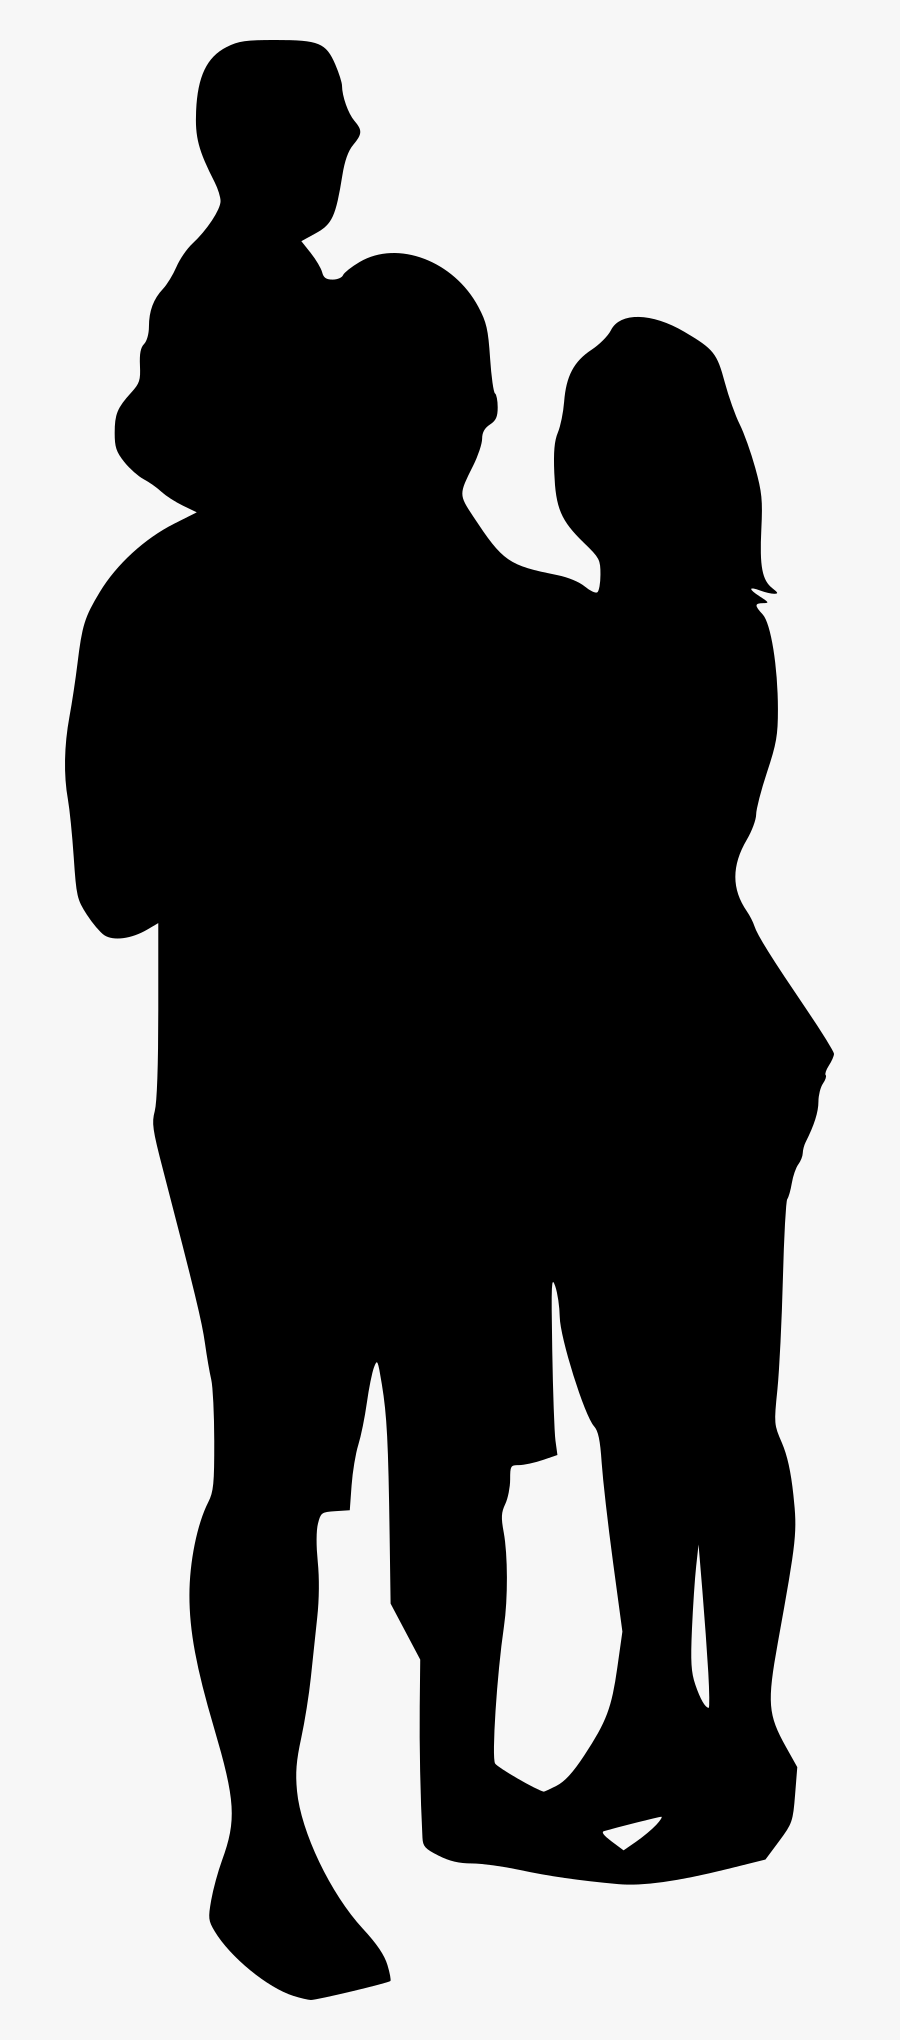 Indian People Silhouette Png, Transparent Clipart